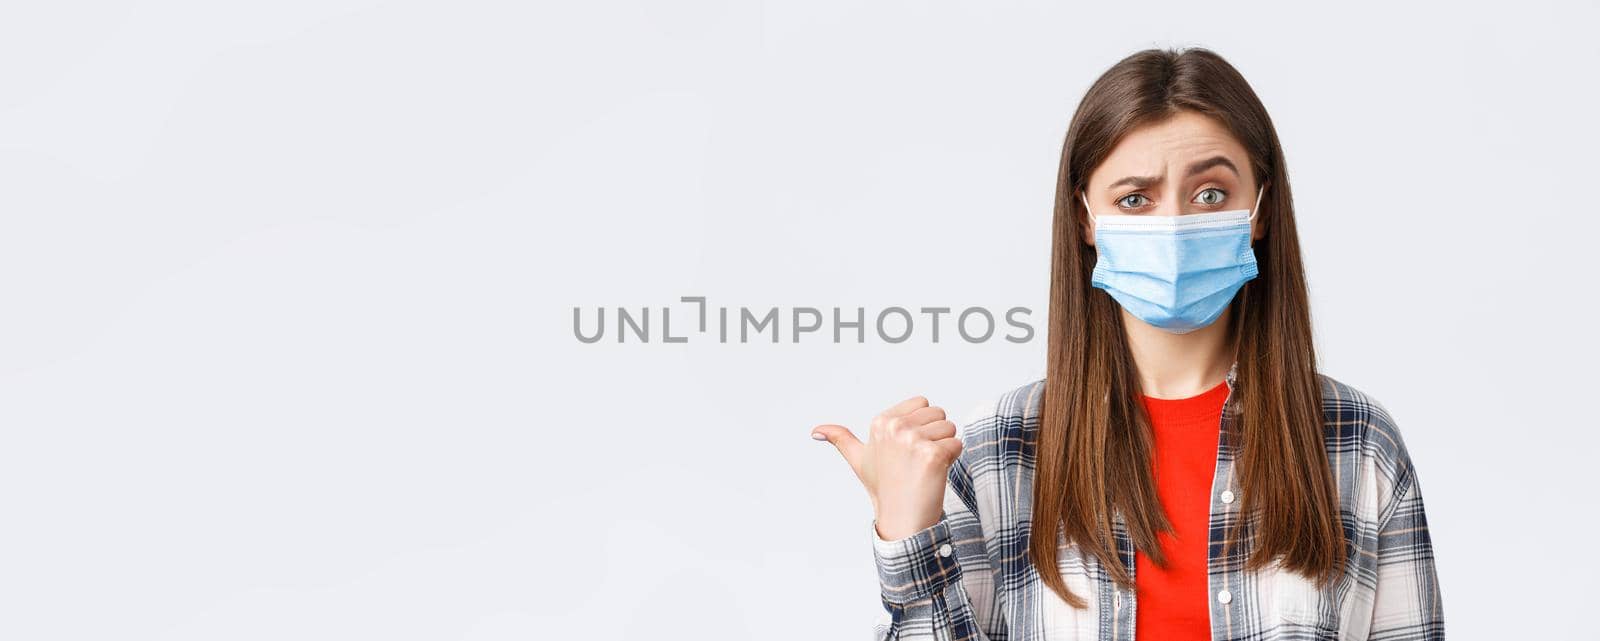 Coronavirus outbreak, leisure on quarantine, social distancing and emotions concept. Skeptical young woman in medical mask express disbelief towards banner to the left, pointing doubtful by Benzoix